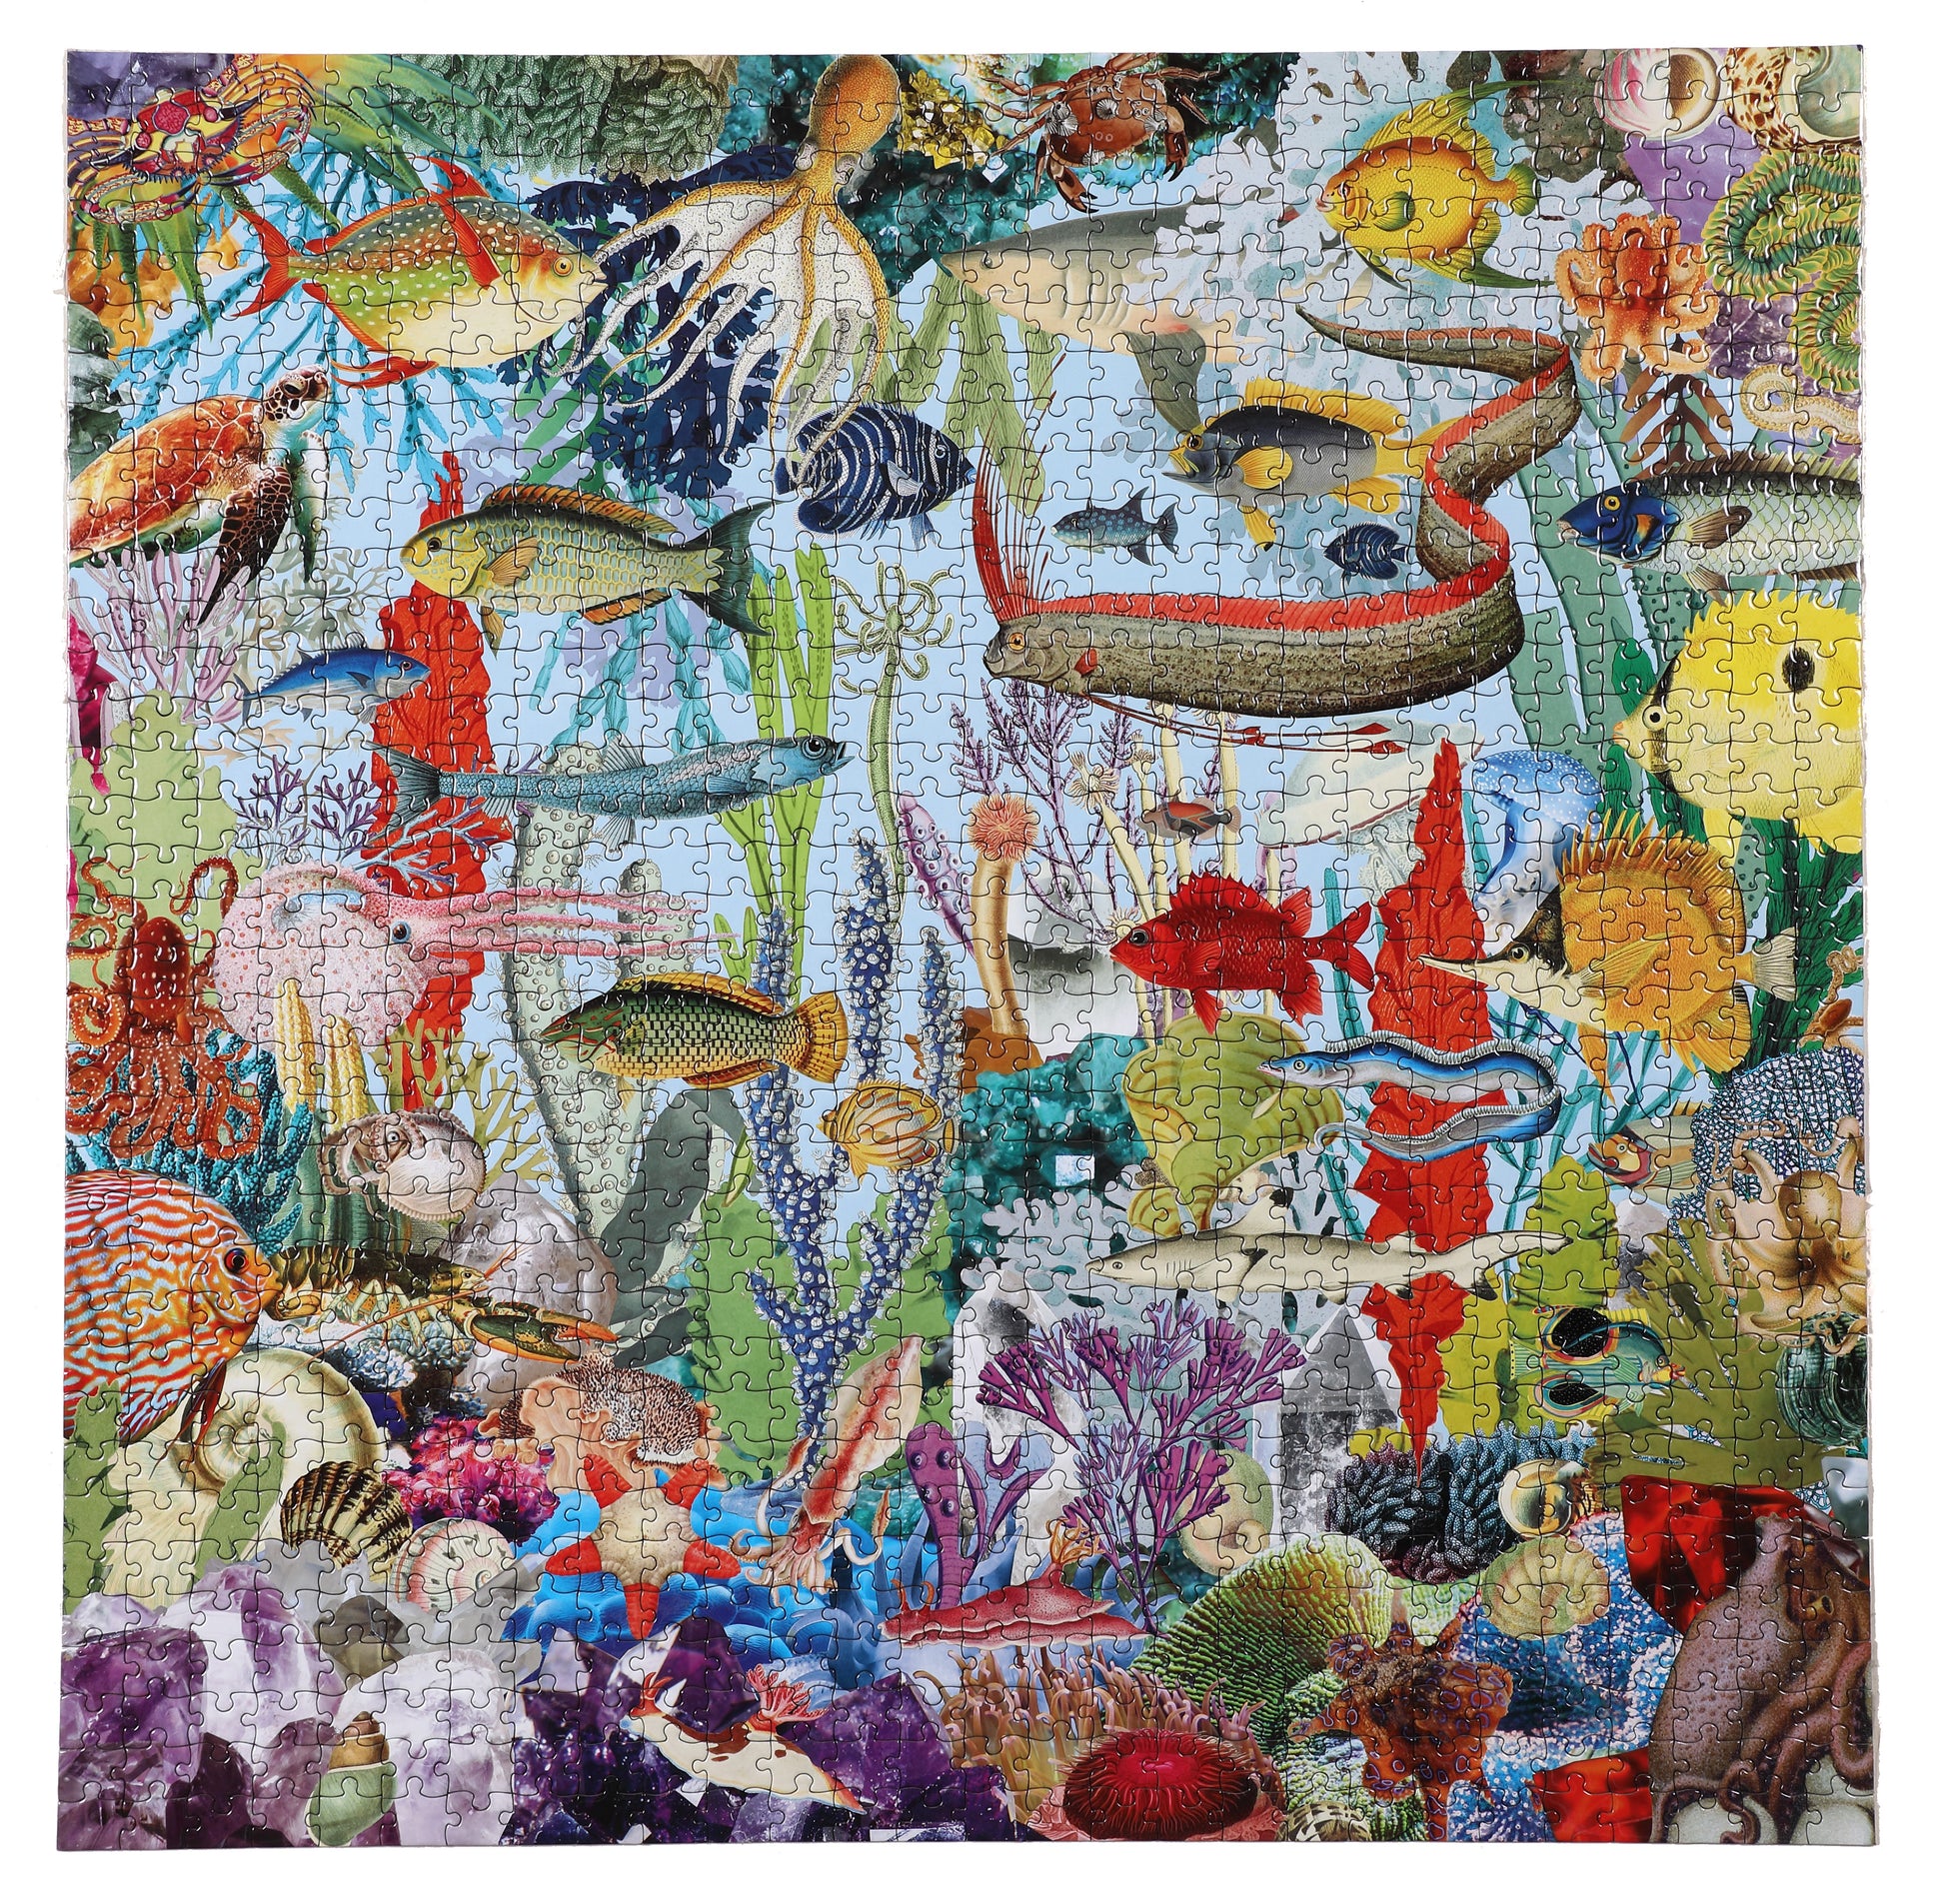 Gems and Fish Underwater Sea 1000 Piece Jigsaw Puzzle | eeBoo Piece & Love | Makes a Great Gift